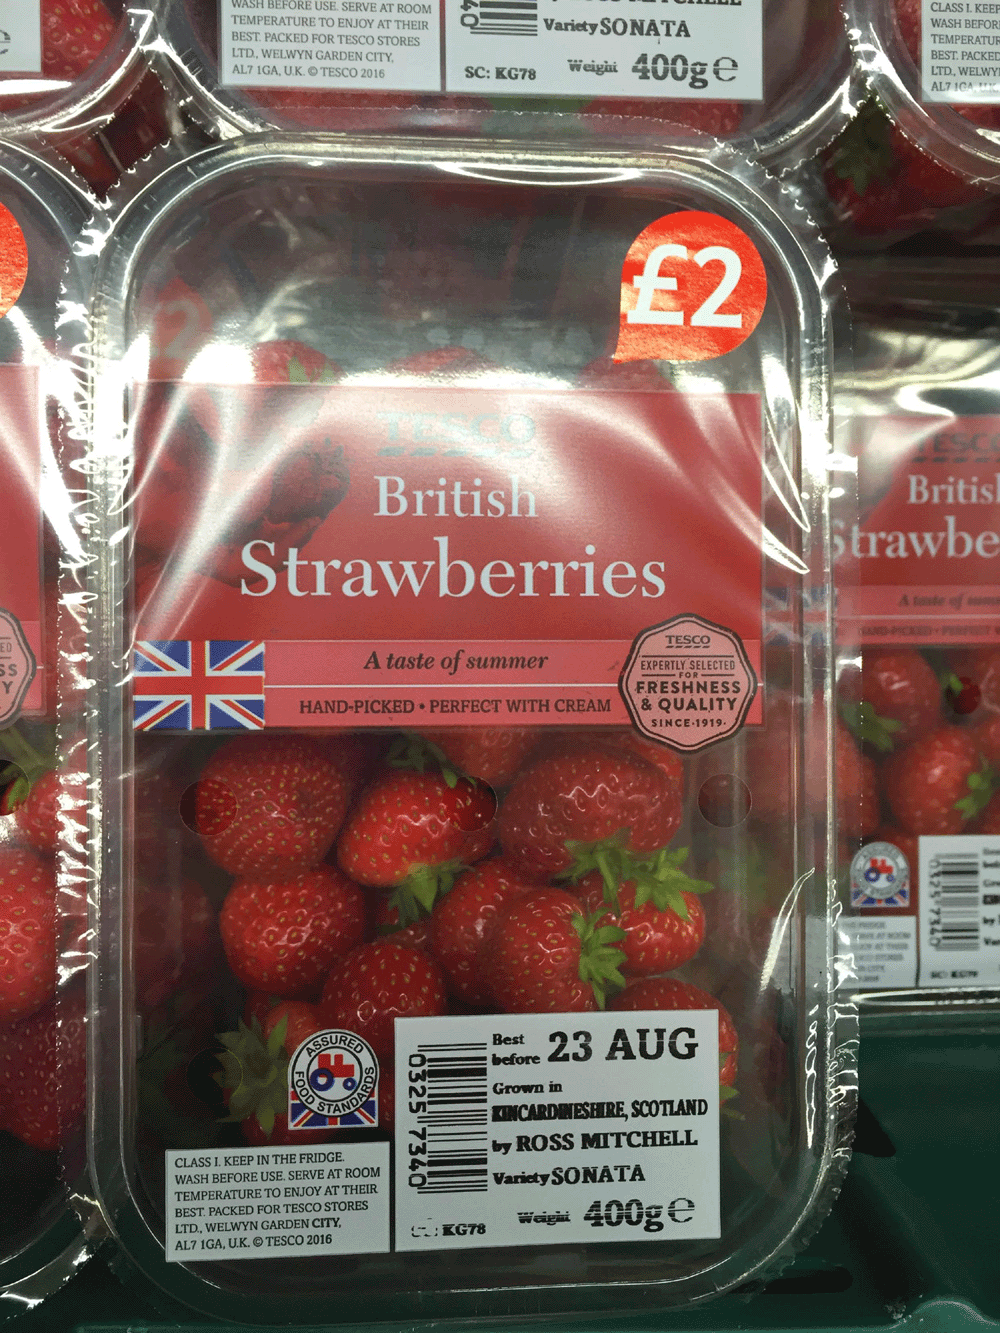 These Scottish strawberries now have the British flag on their packaging